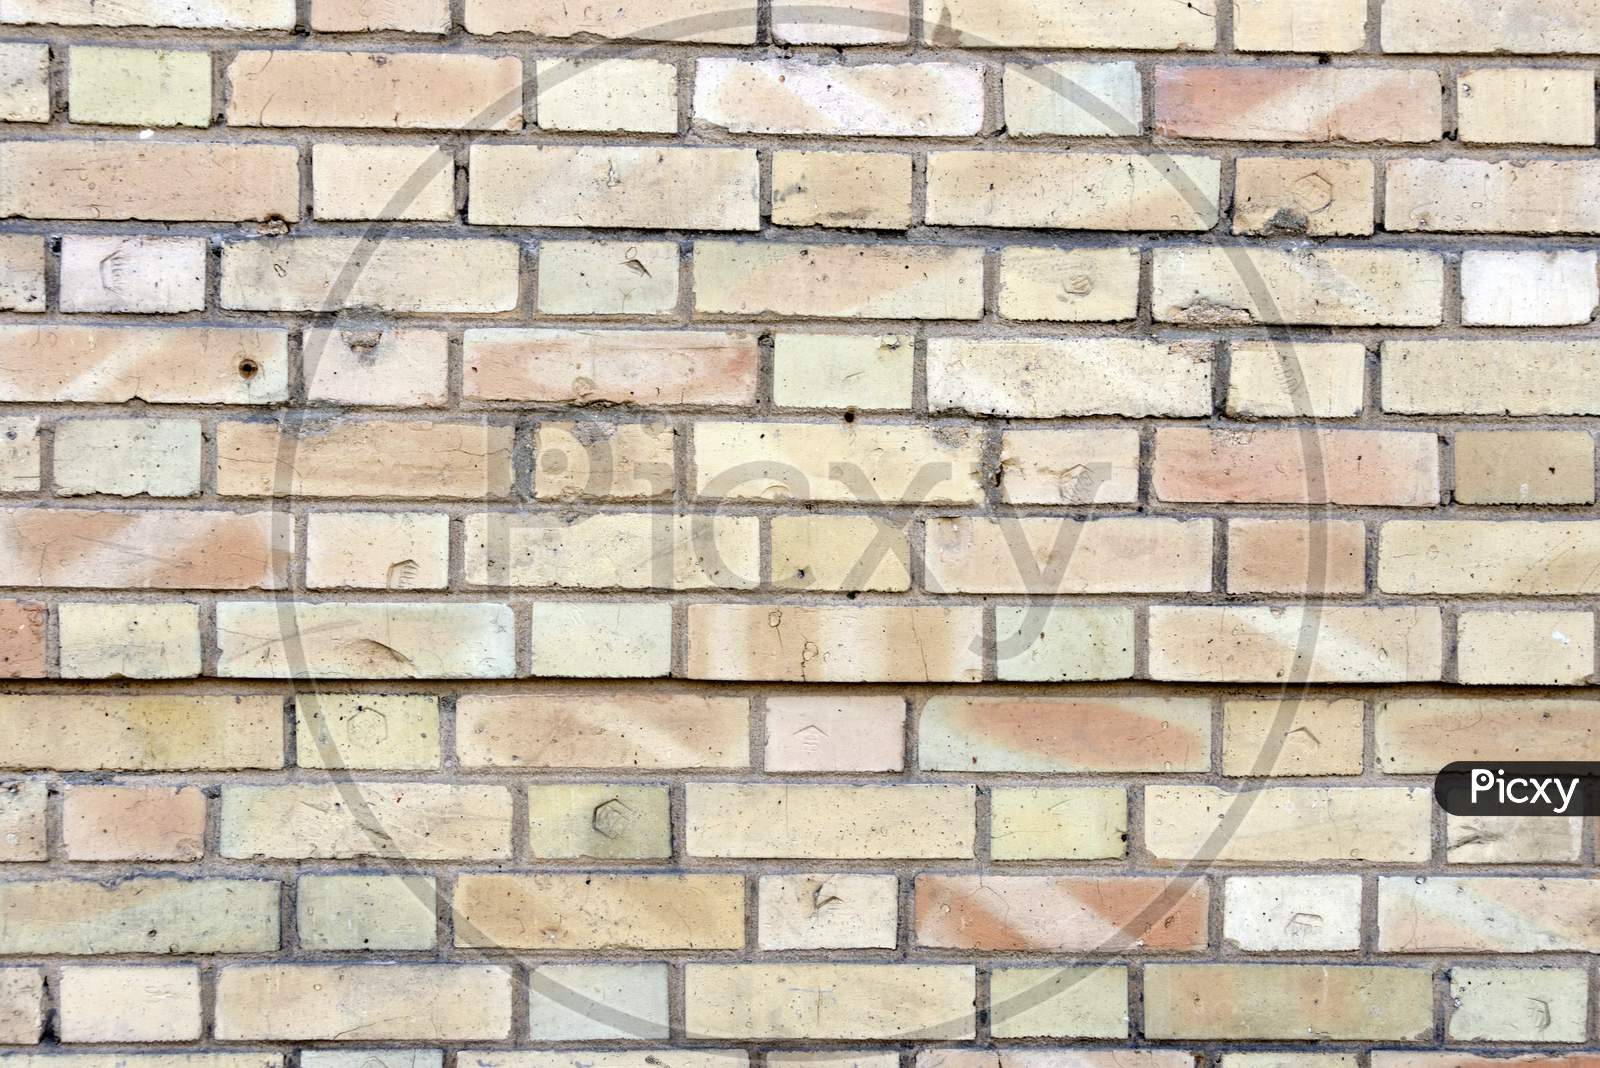 Wall Made Up Of Faded Colored Bricks Looking Stunning In Rectangular Pattern